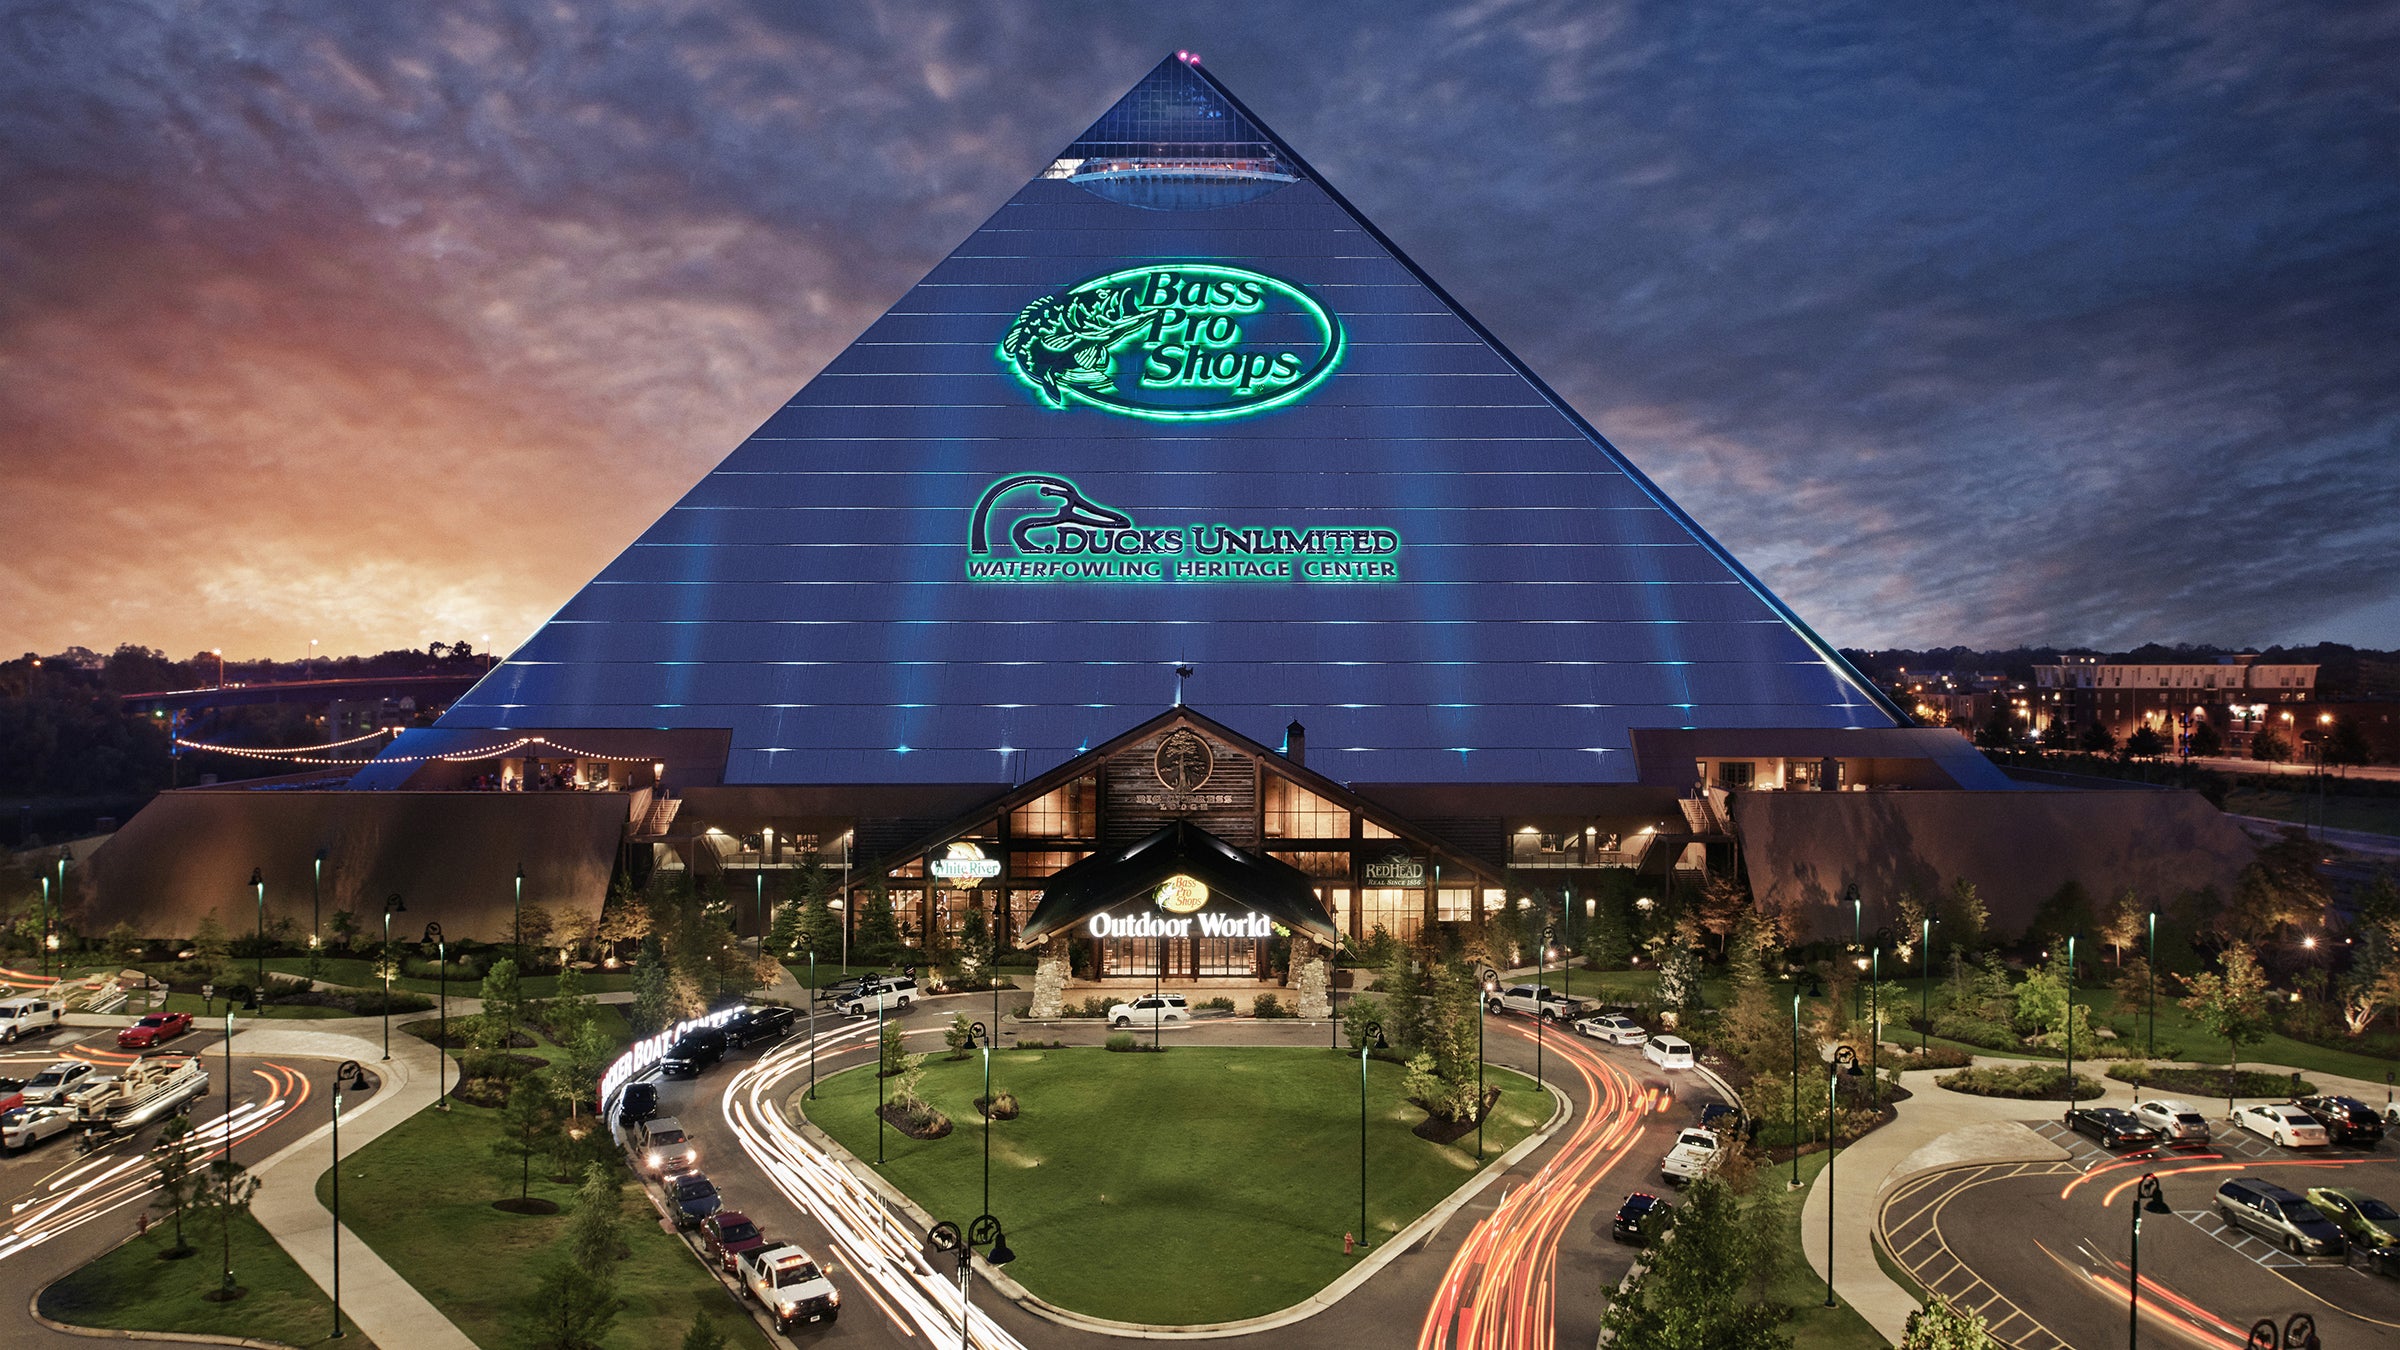 An update of my Bass Pro Shops Pyramid. Almost done with the